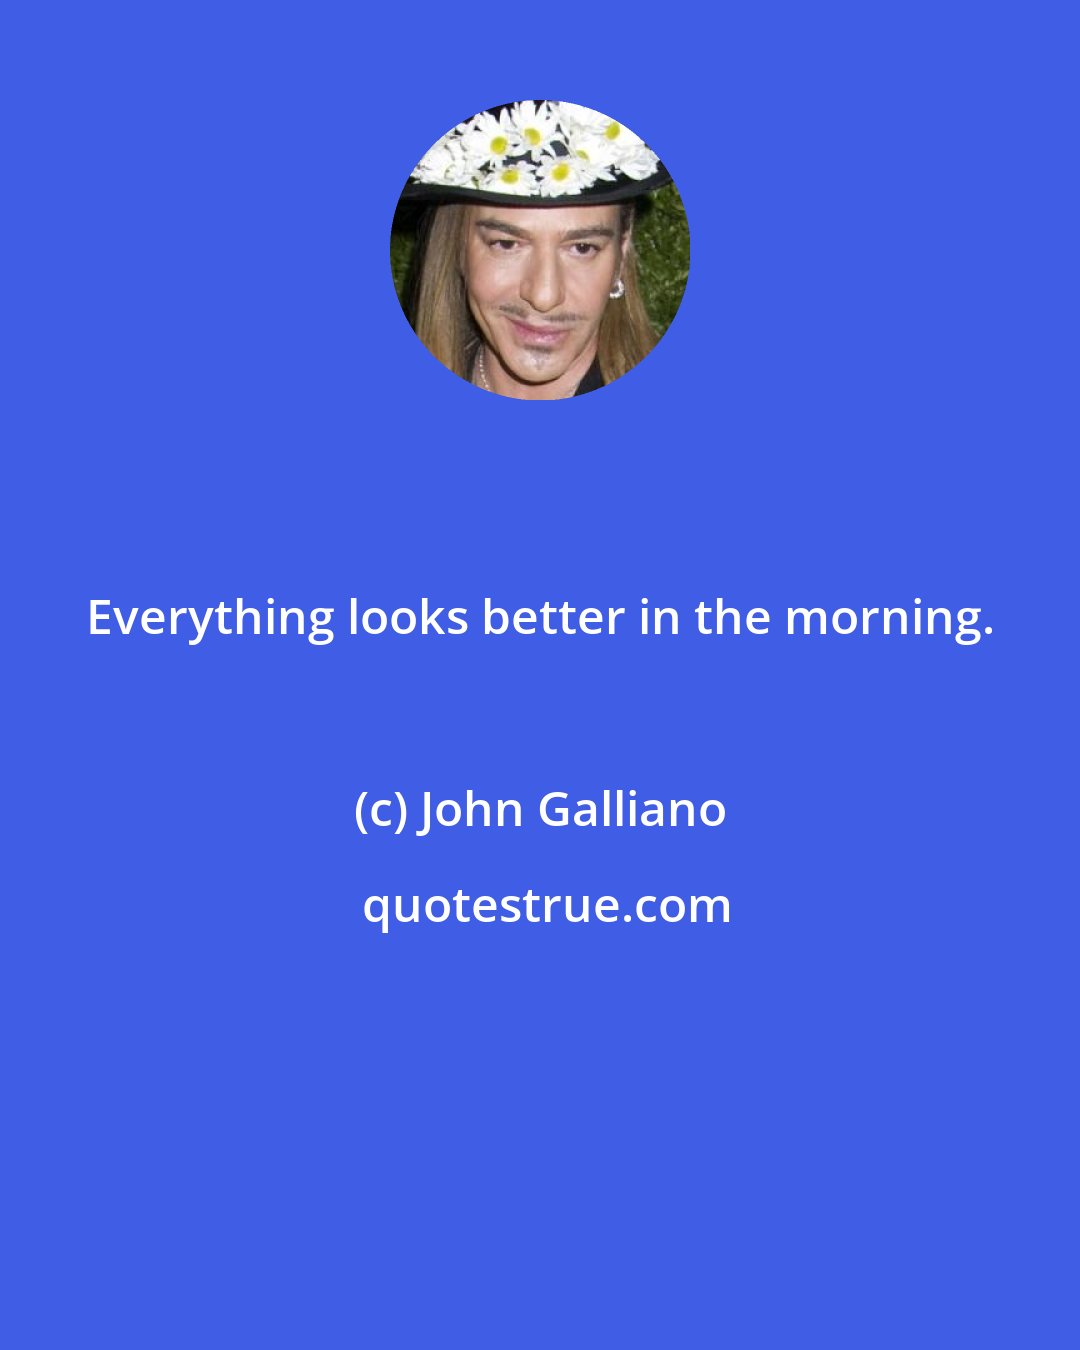 John Galliano: Everything looks better in the morning.